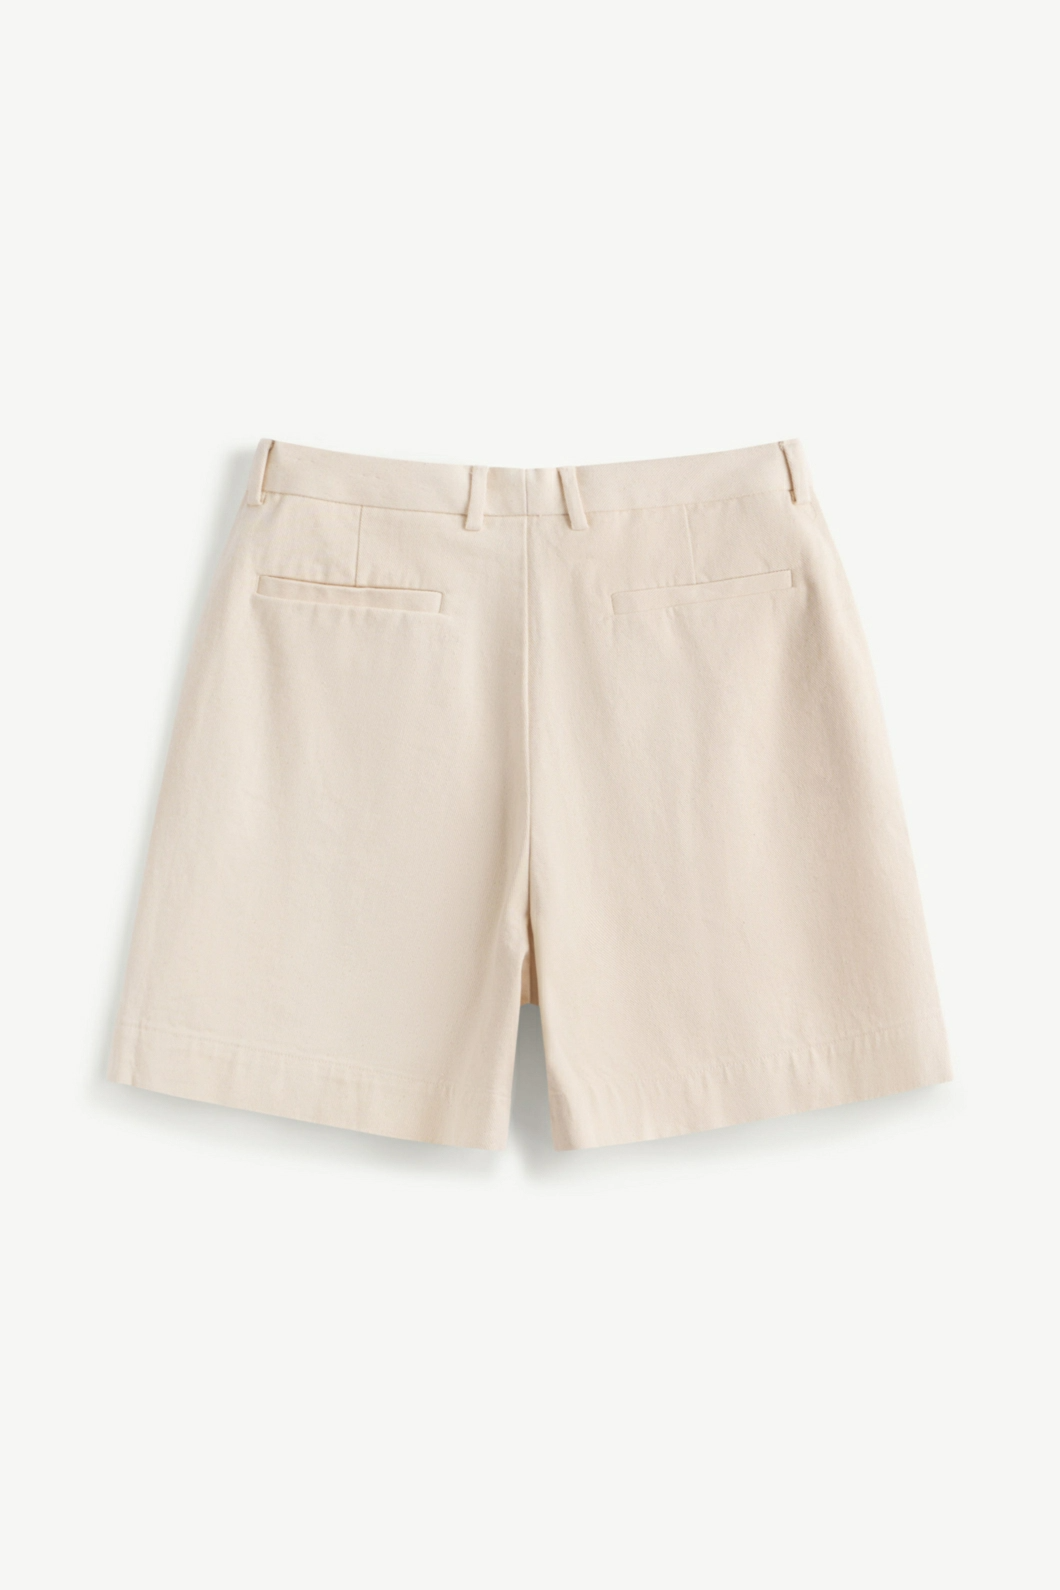 Quần short nam ROUTINE ống rộng. Form Loose - 10S24PSH004 | LASTORE MENSWEAR